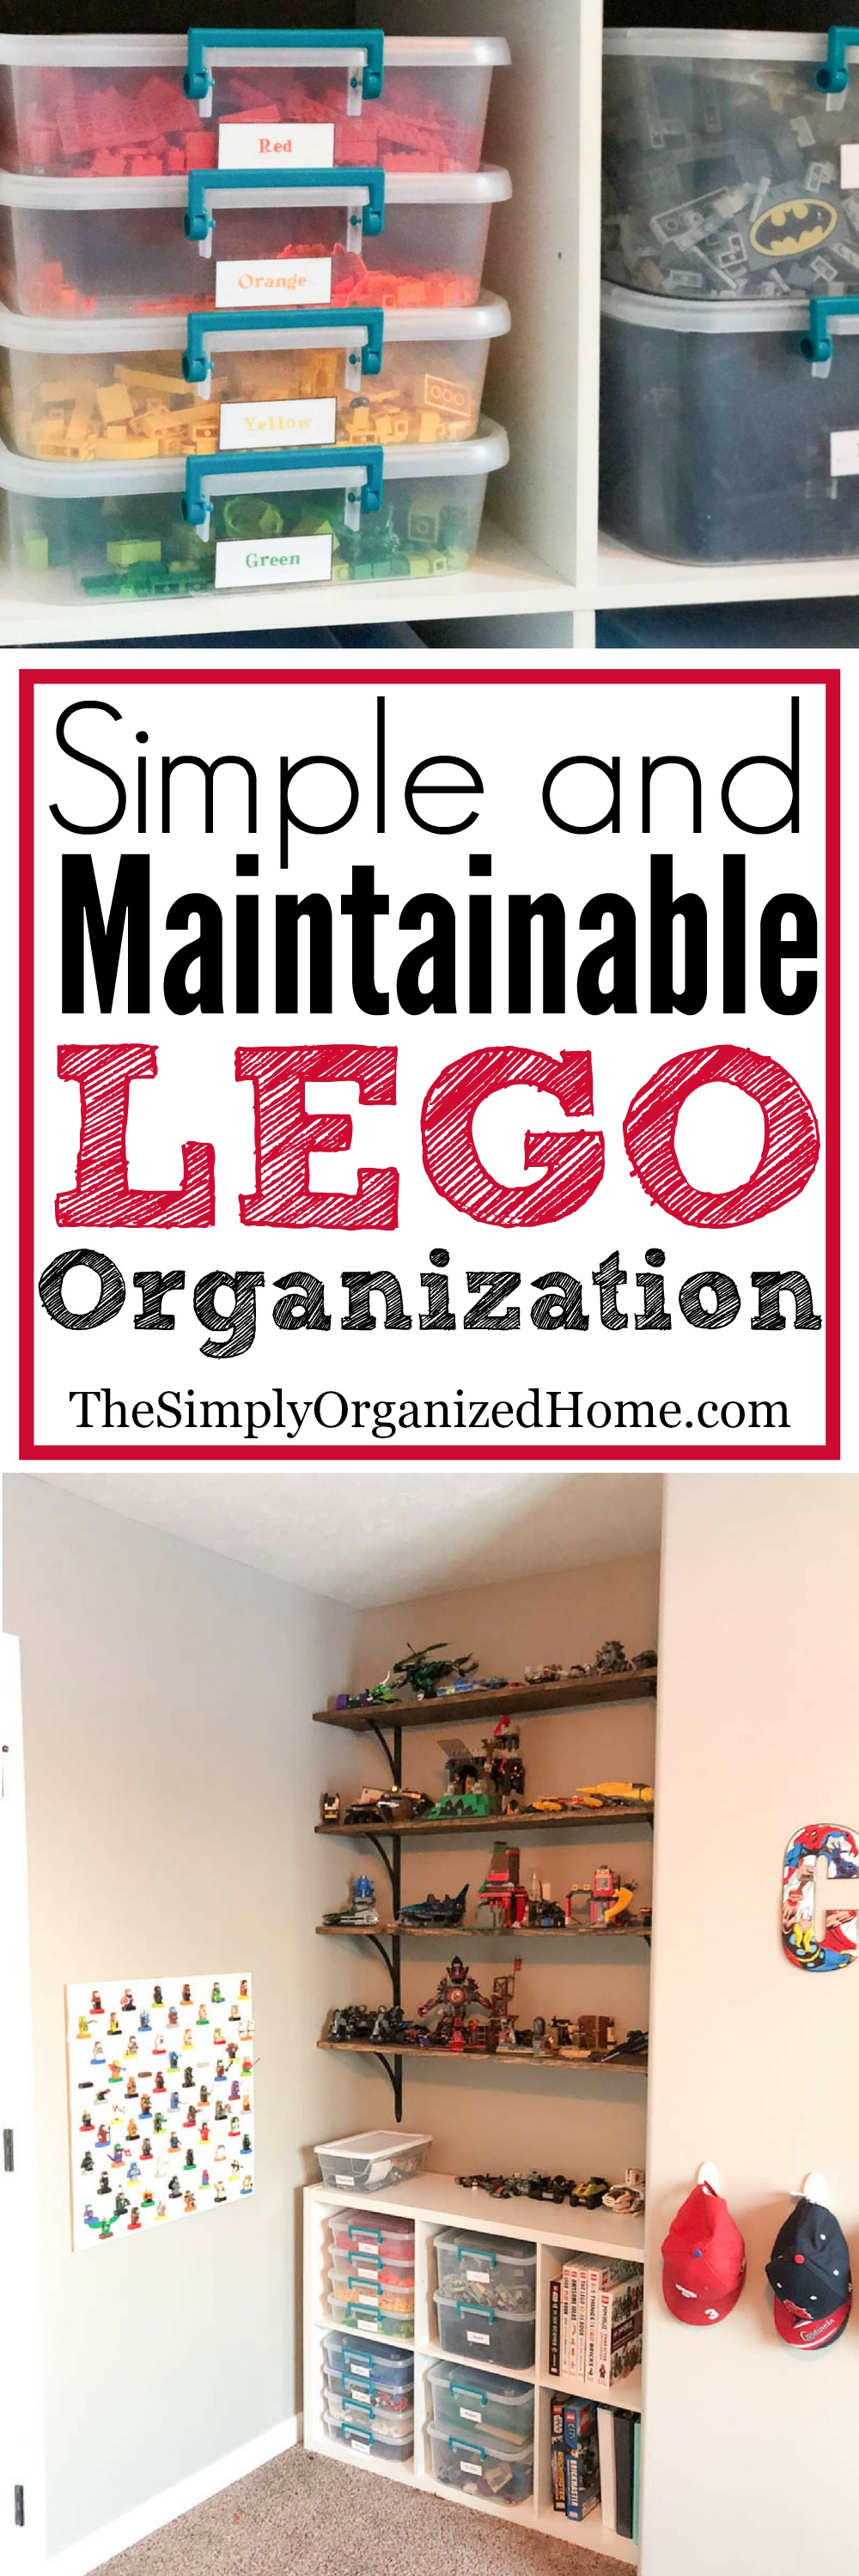 Best Lego Storage Ideas for Your Home